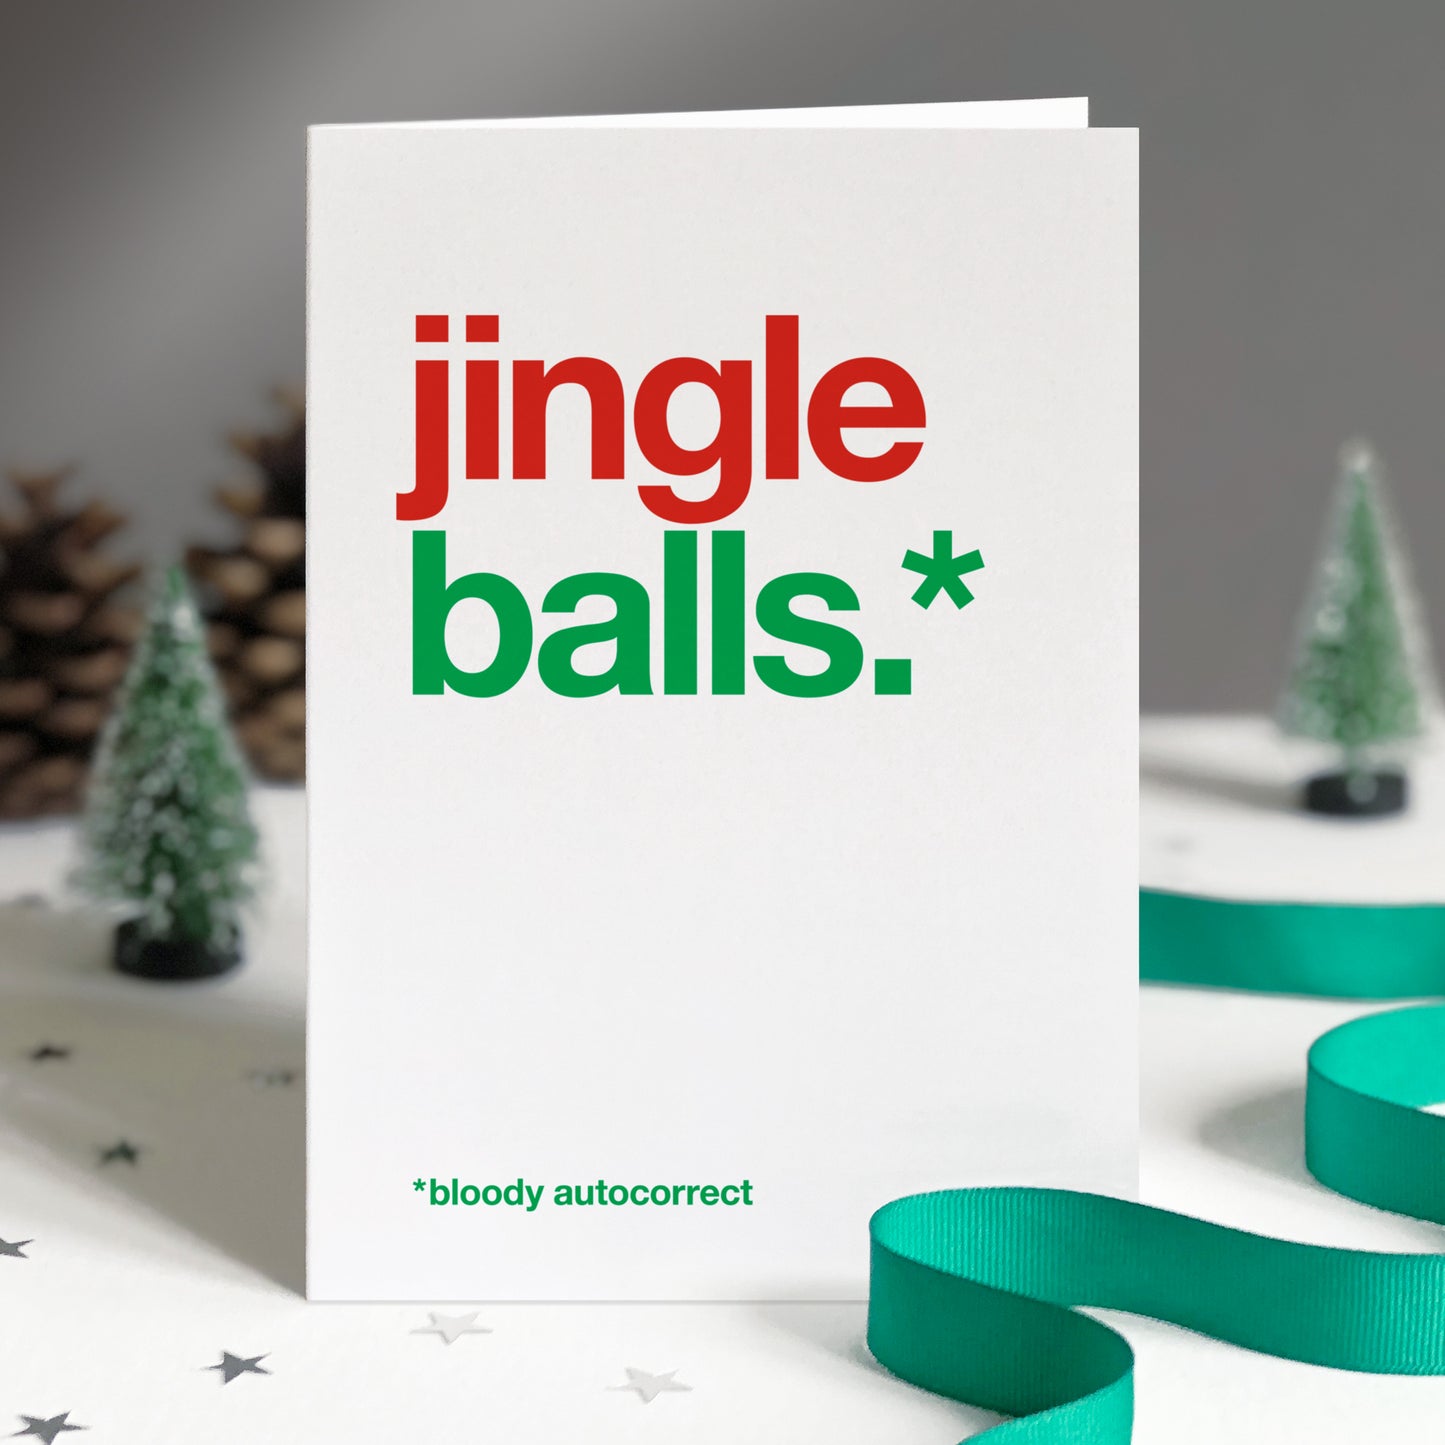 A white card with colourful text saying jingle balls.* *bloody autocorrect